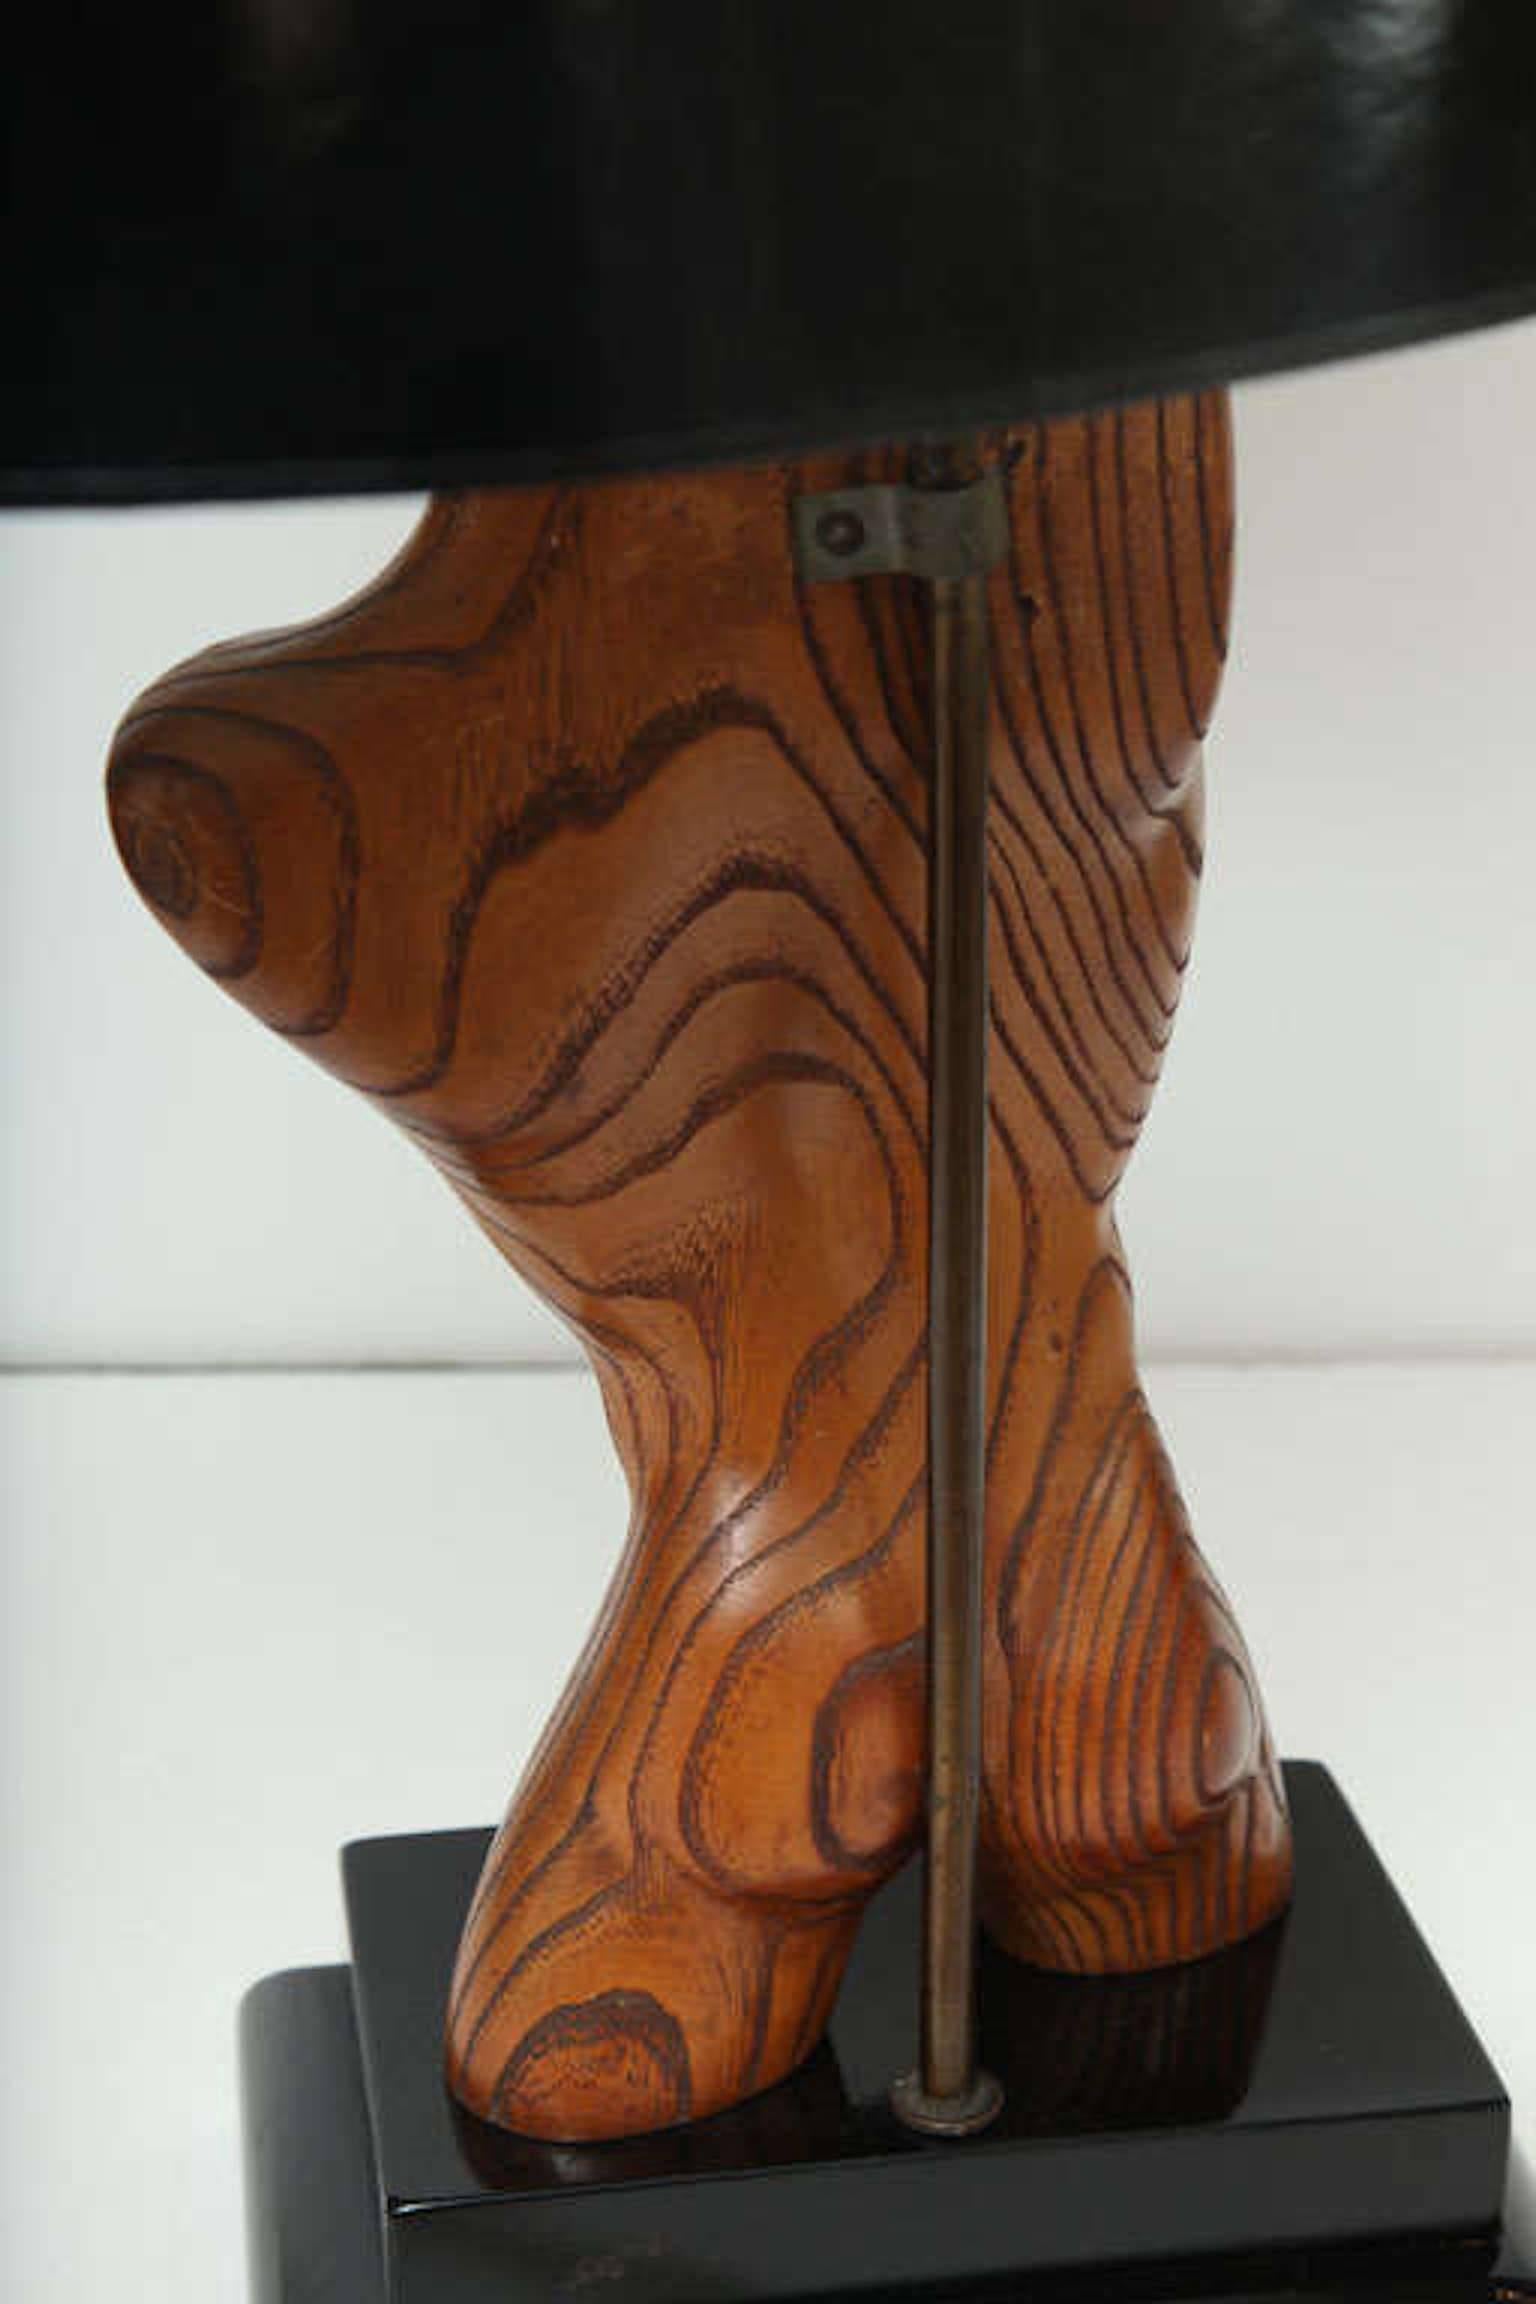 Lacquer Table Lamp, Wood, Male Nude, by Keifetz, C 1950